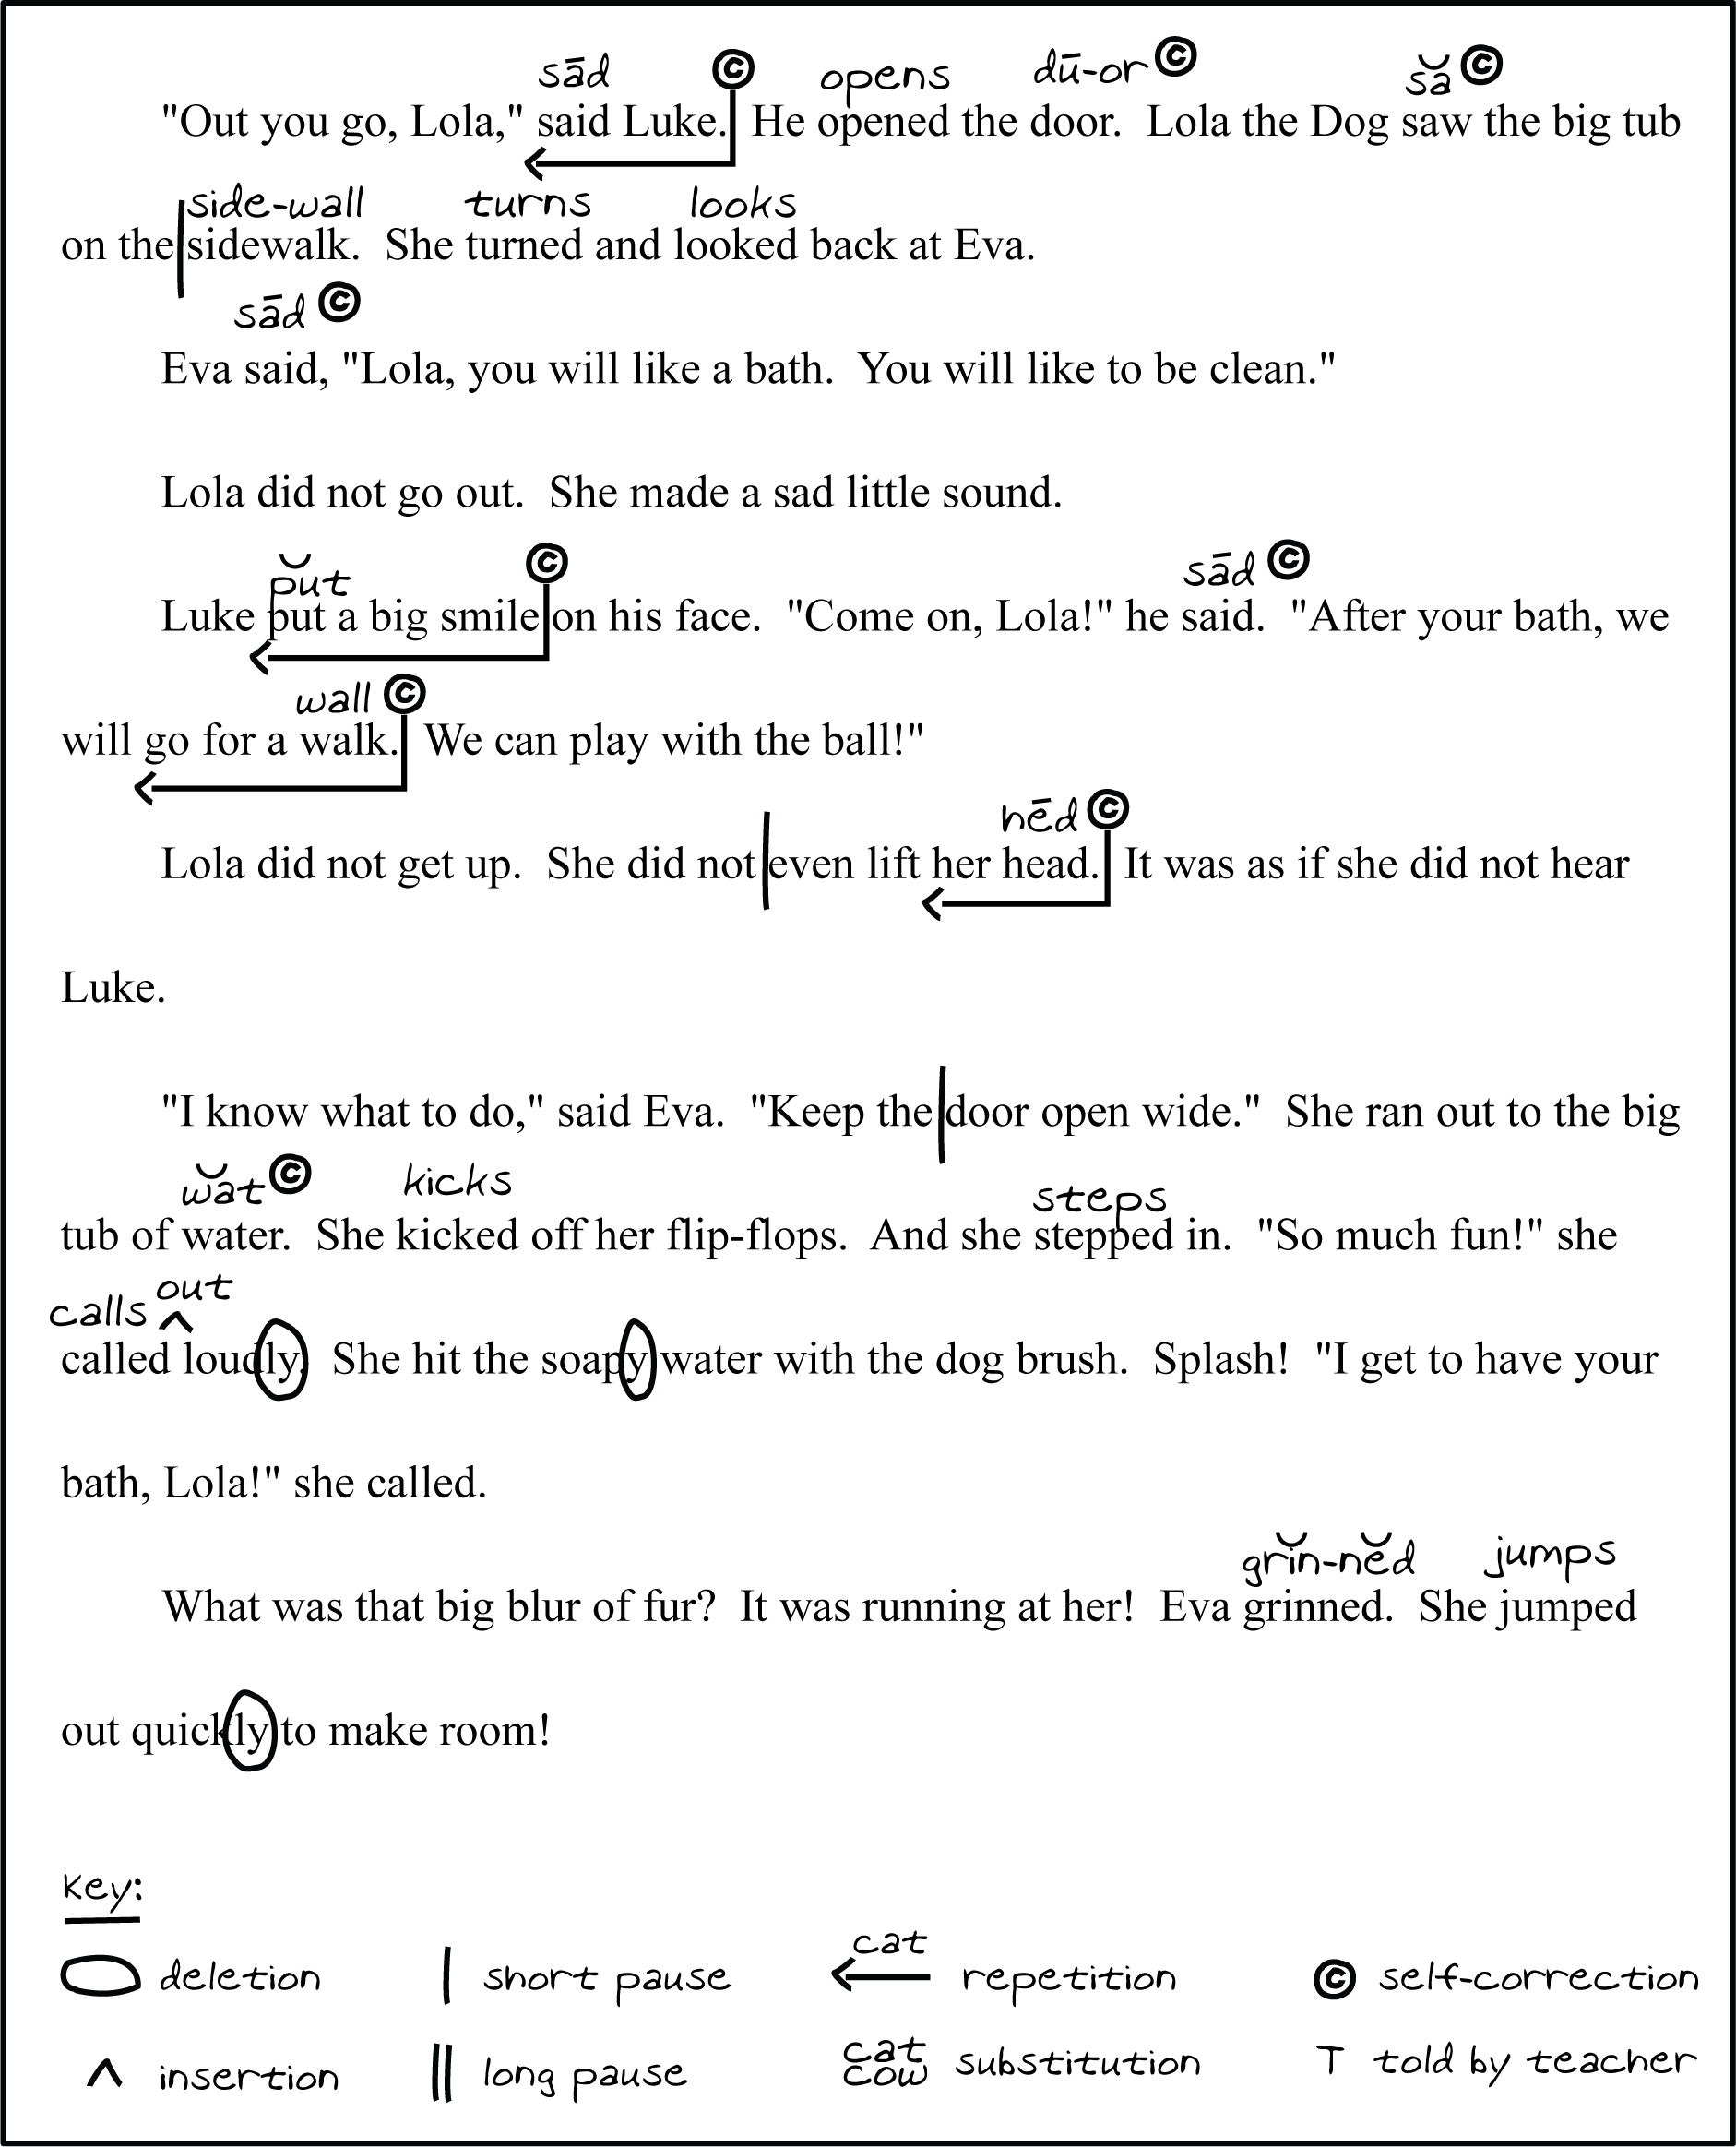 an annotated passage depicting a student's oral reading performance